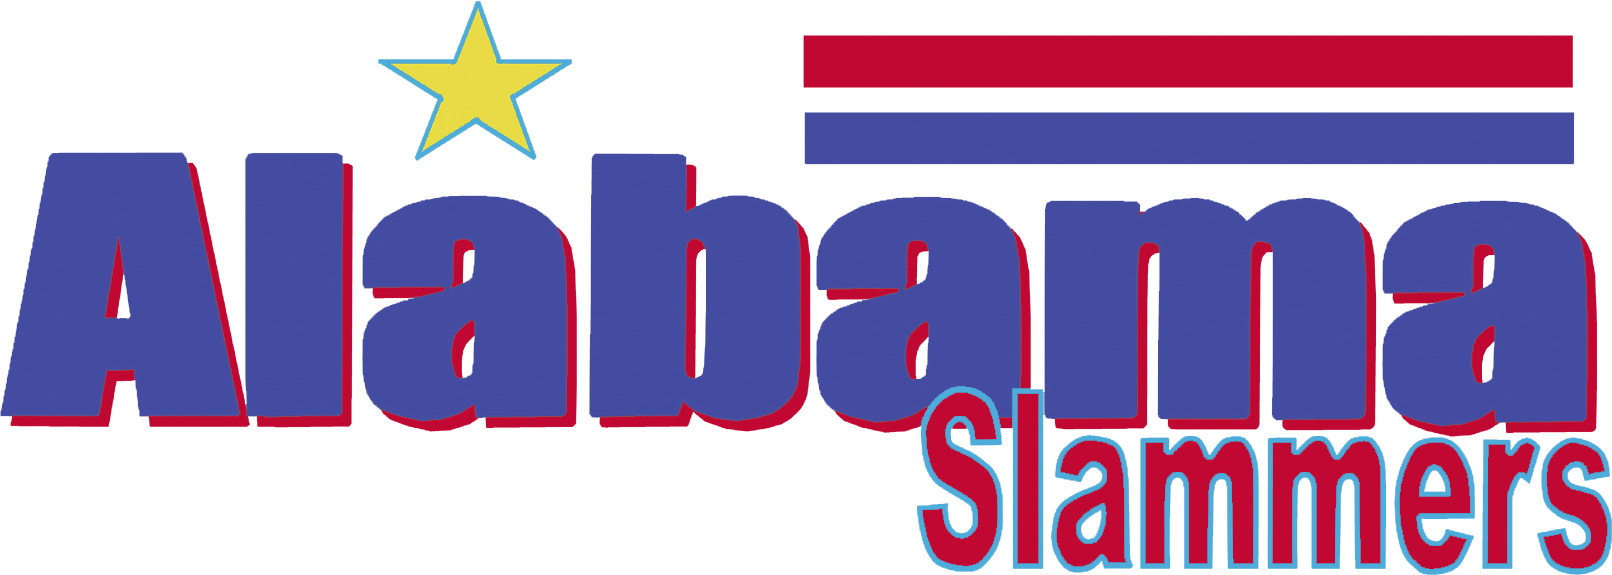 parallax showing logo of the band Alabama Slammers